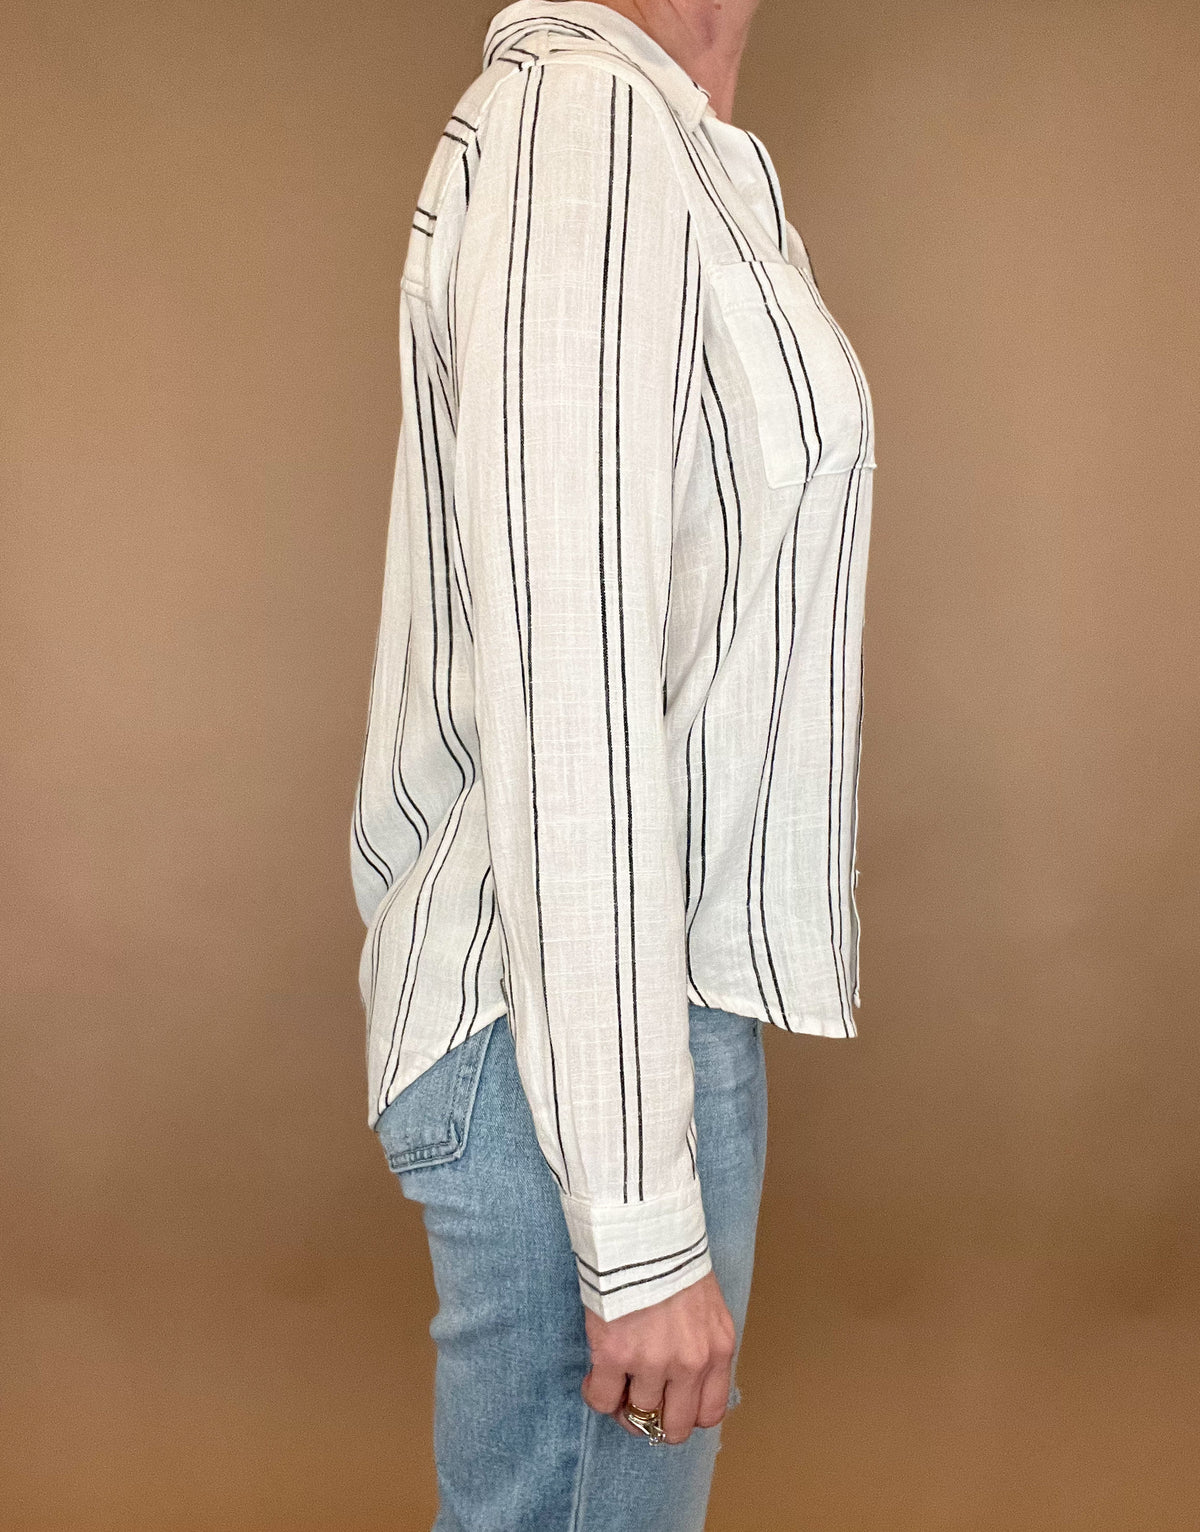 Introducing the Bestie Shirt in Black, your new companion for the spring and summer season. Made with a luxurious linen blend, this stylish striped shirt is versatile enough to pair with any casual denim and sandals. Let it be your go-to piece for effortless fashion.